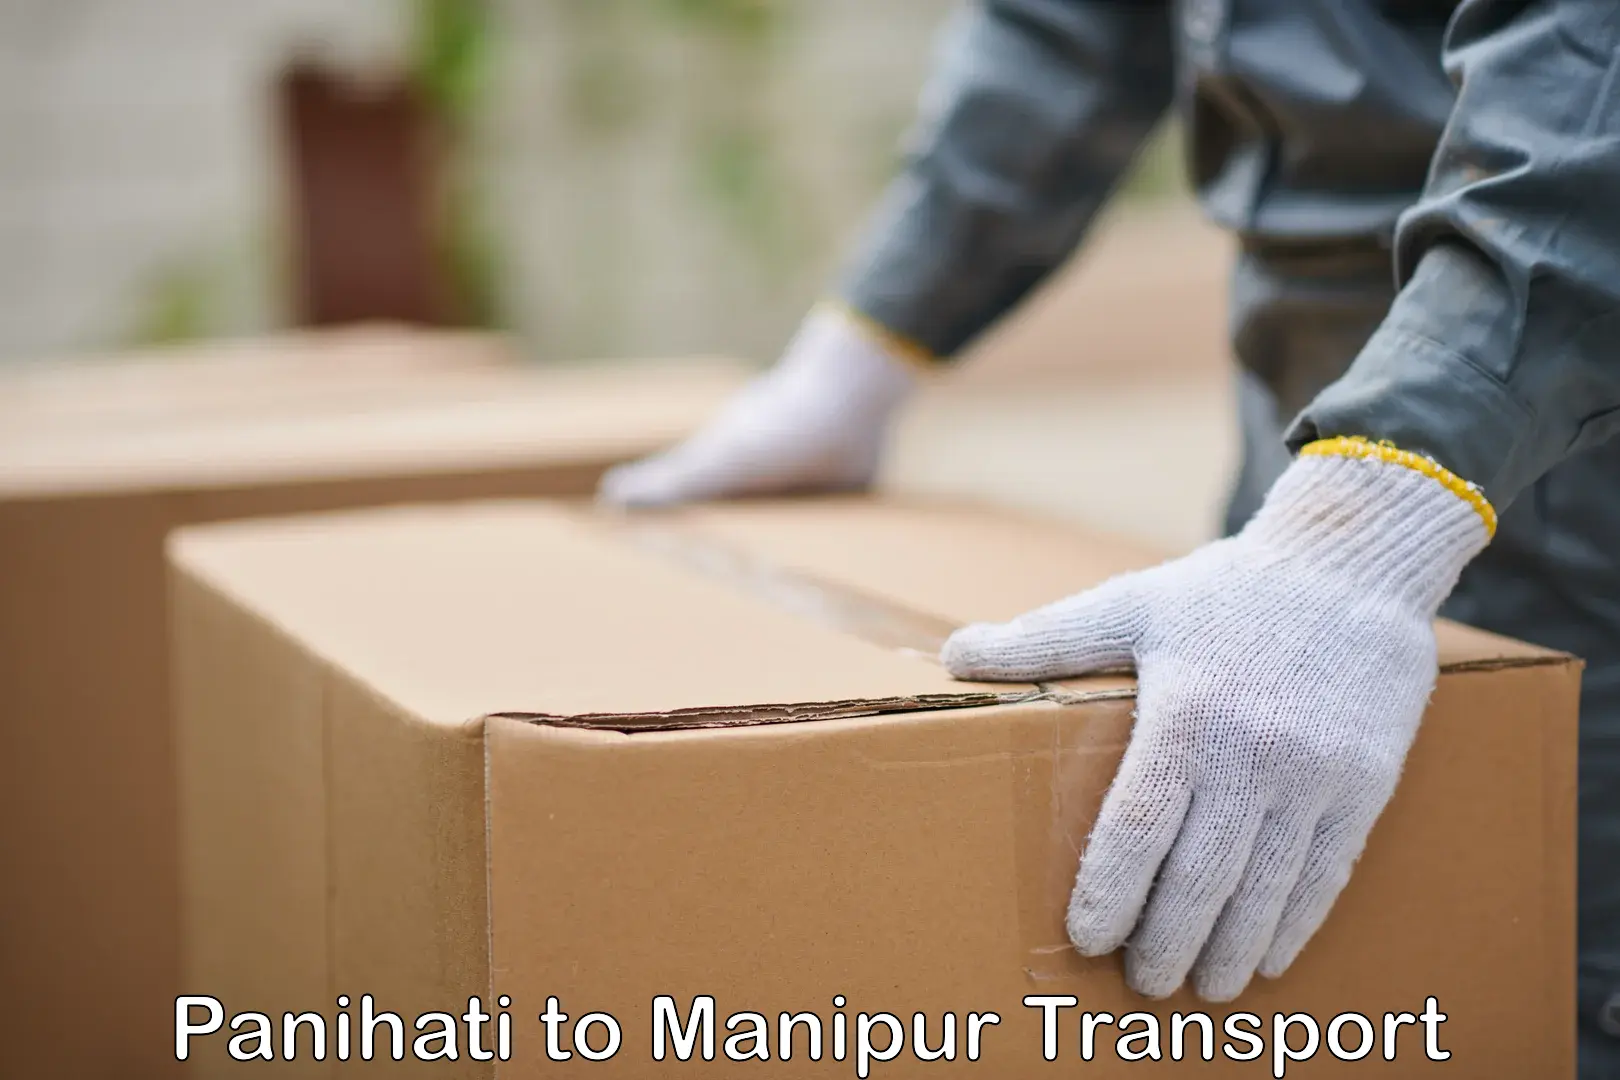 Container transport service Panihati to Manipur